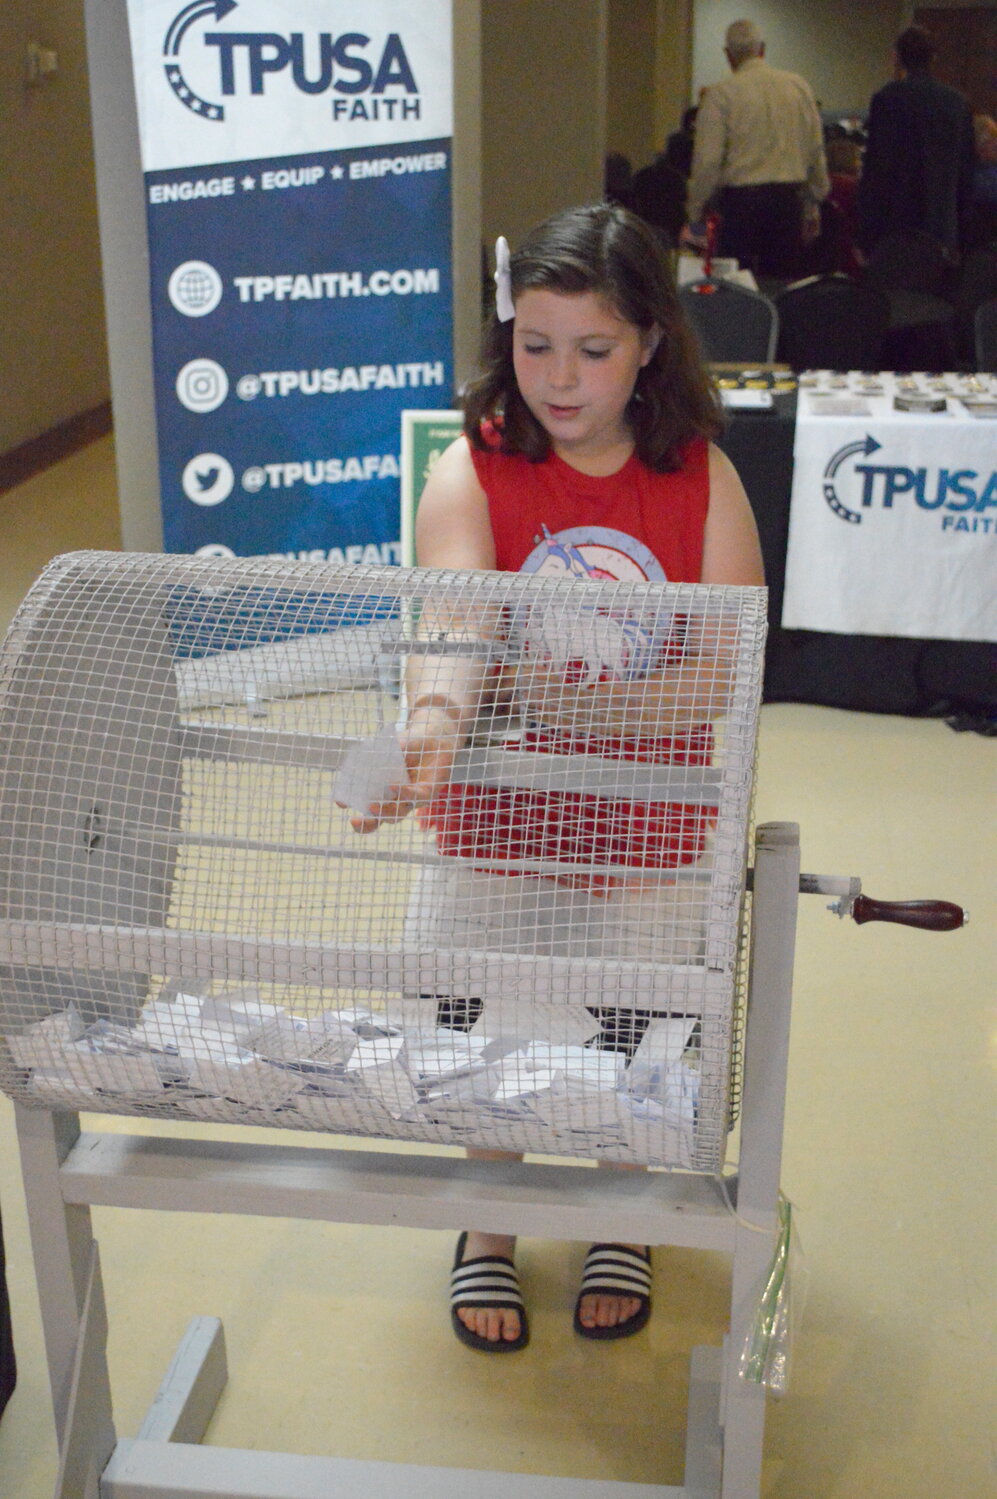 Kaitlin Cochran, daughter of Crawford County Republican Party chairman Jacob Cochran, helped out at the Dinner and Discussion event Saturday, May 20 by putting names into the raffle.